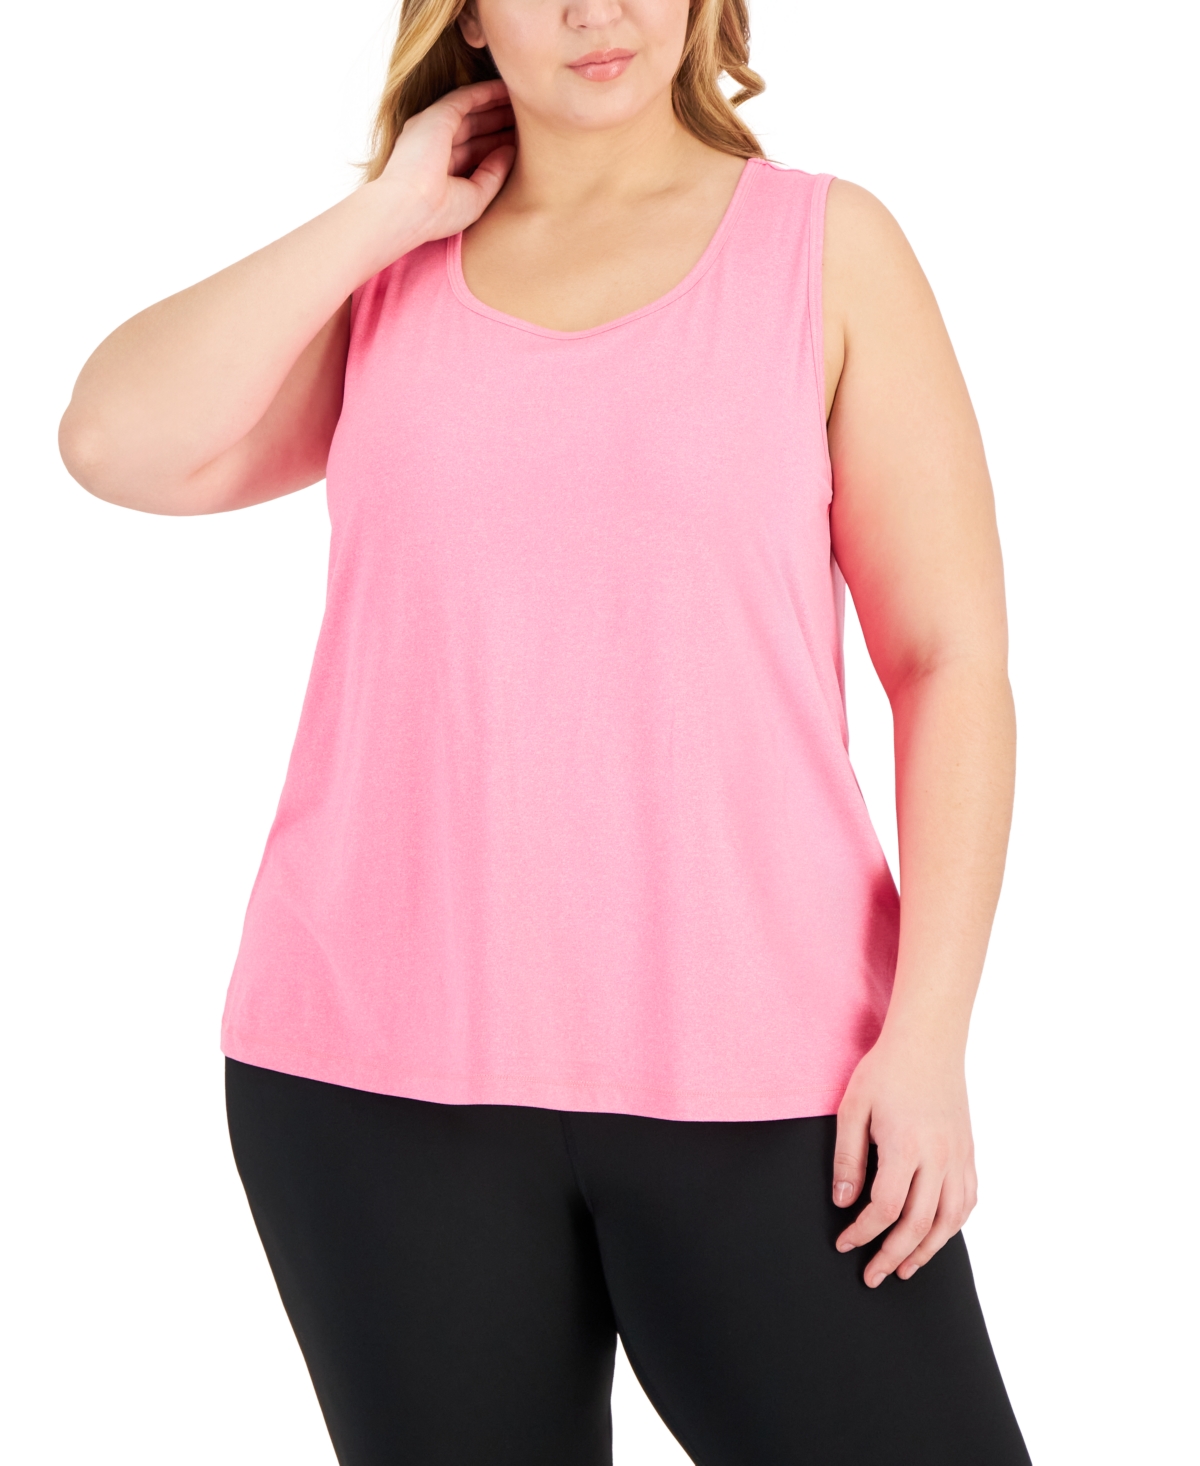 Plus Size Solid Essentials Crewneck Tank Top, Created for Macy's - Deep Black